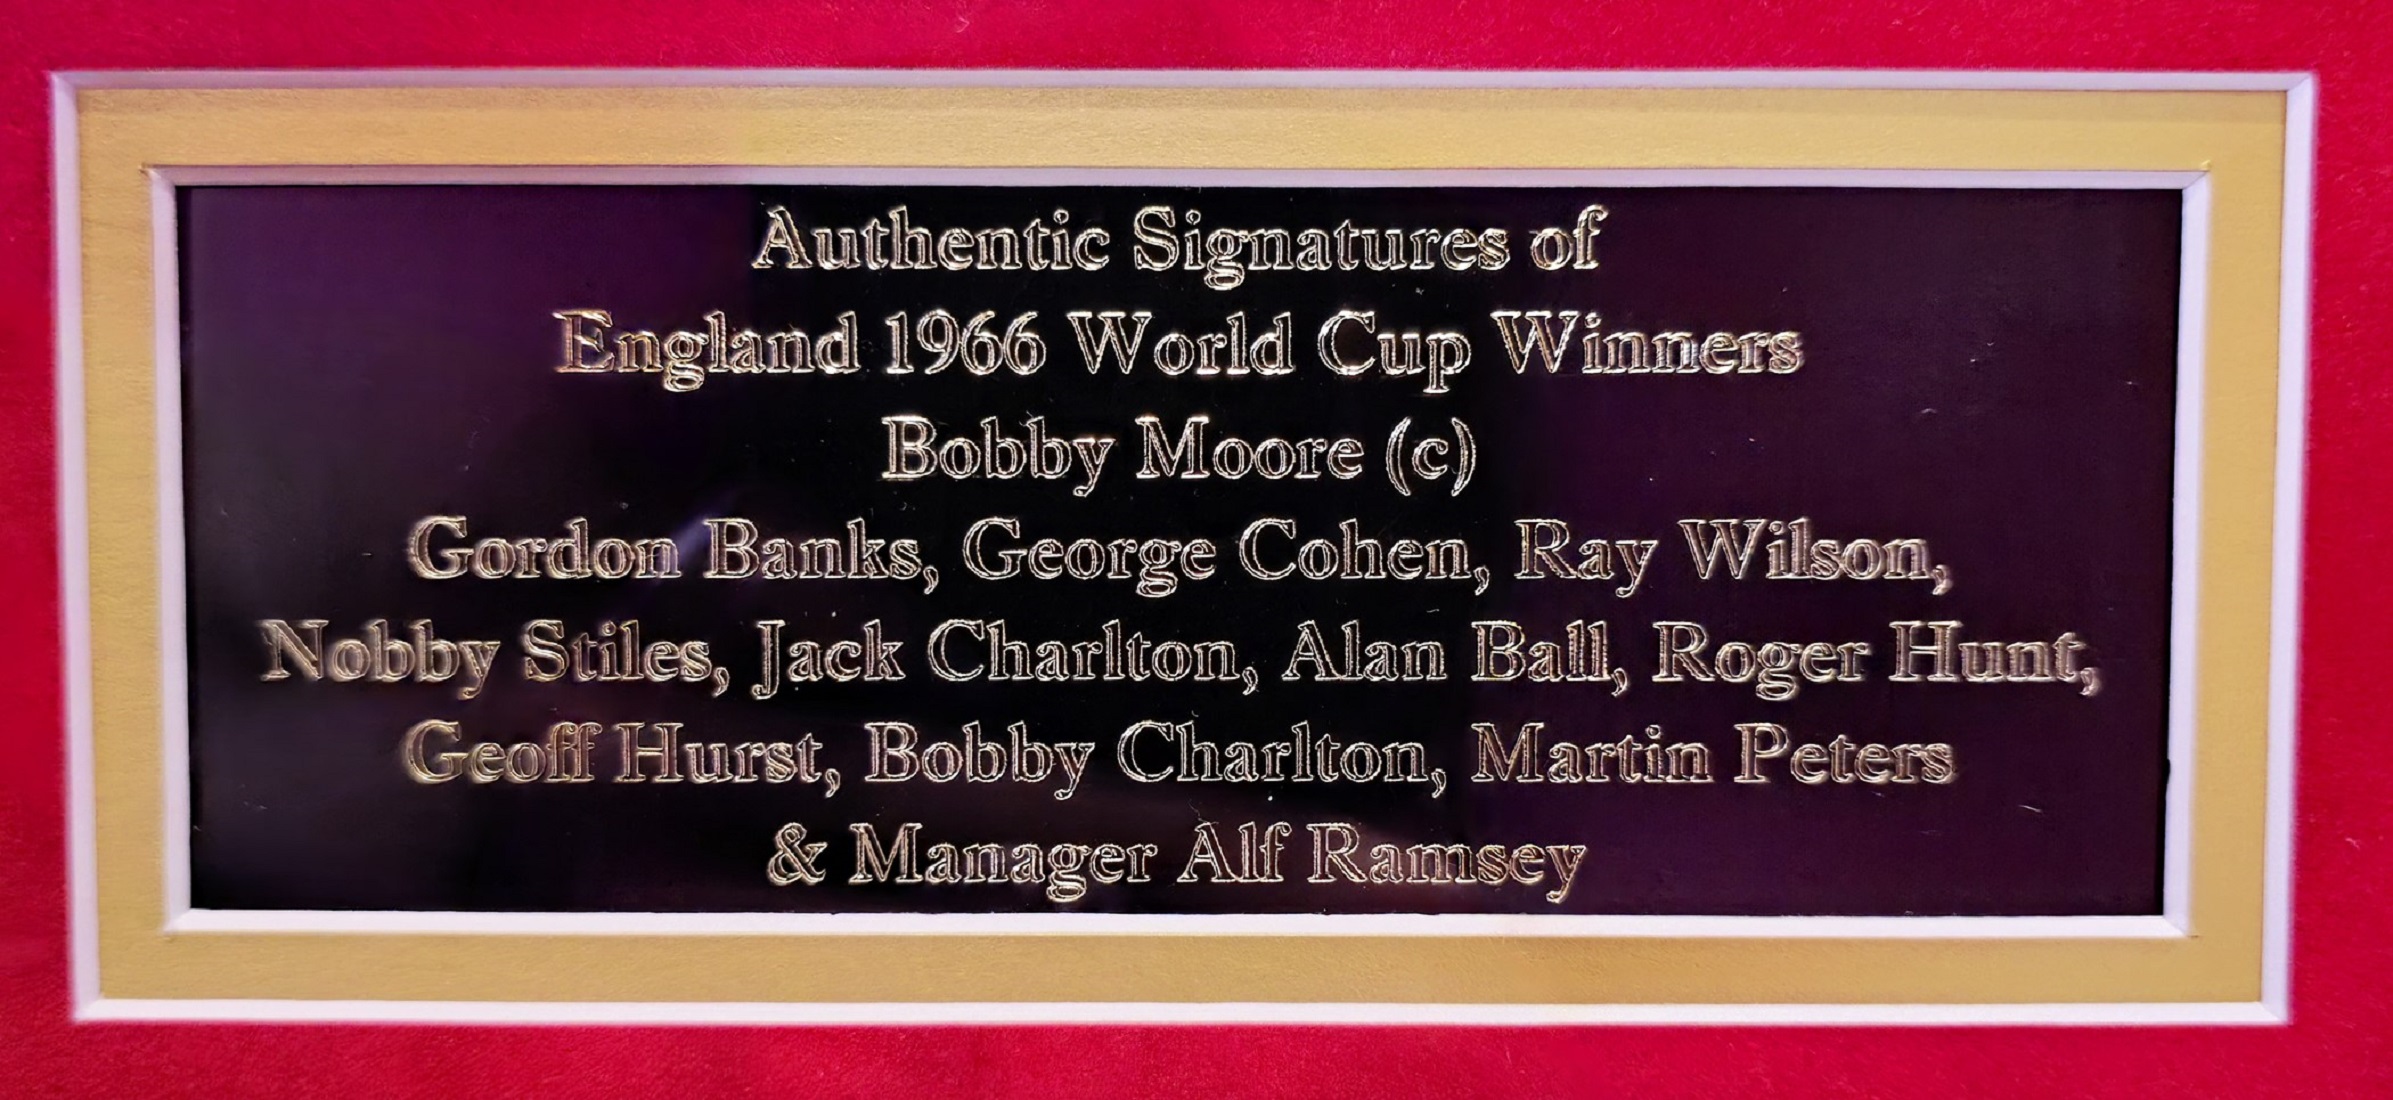 England World Cup Winners 1966, 30x30 inch approx. mounted and framed signature display includes all - Image 4 of 4